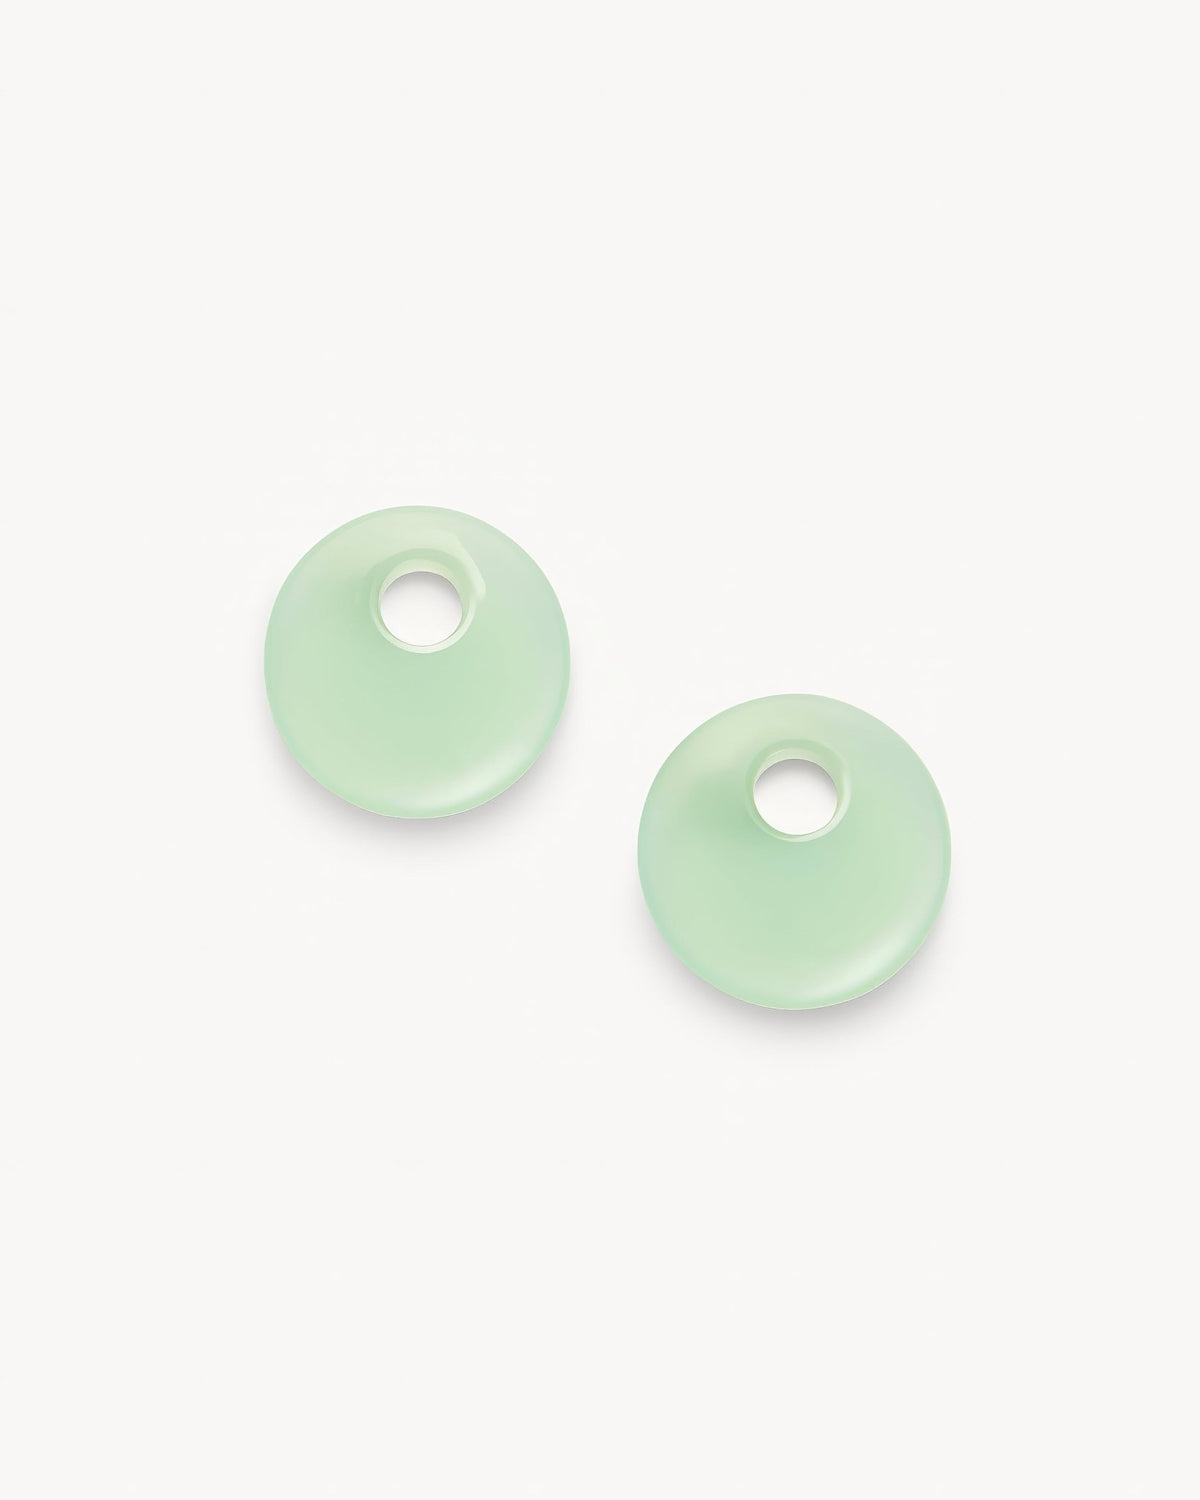 Disc Earring Charms in Sea Glass